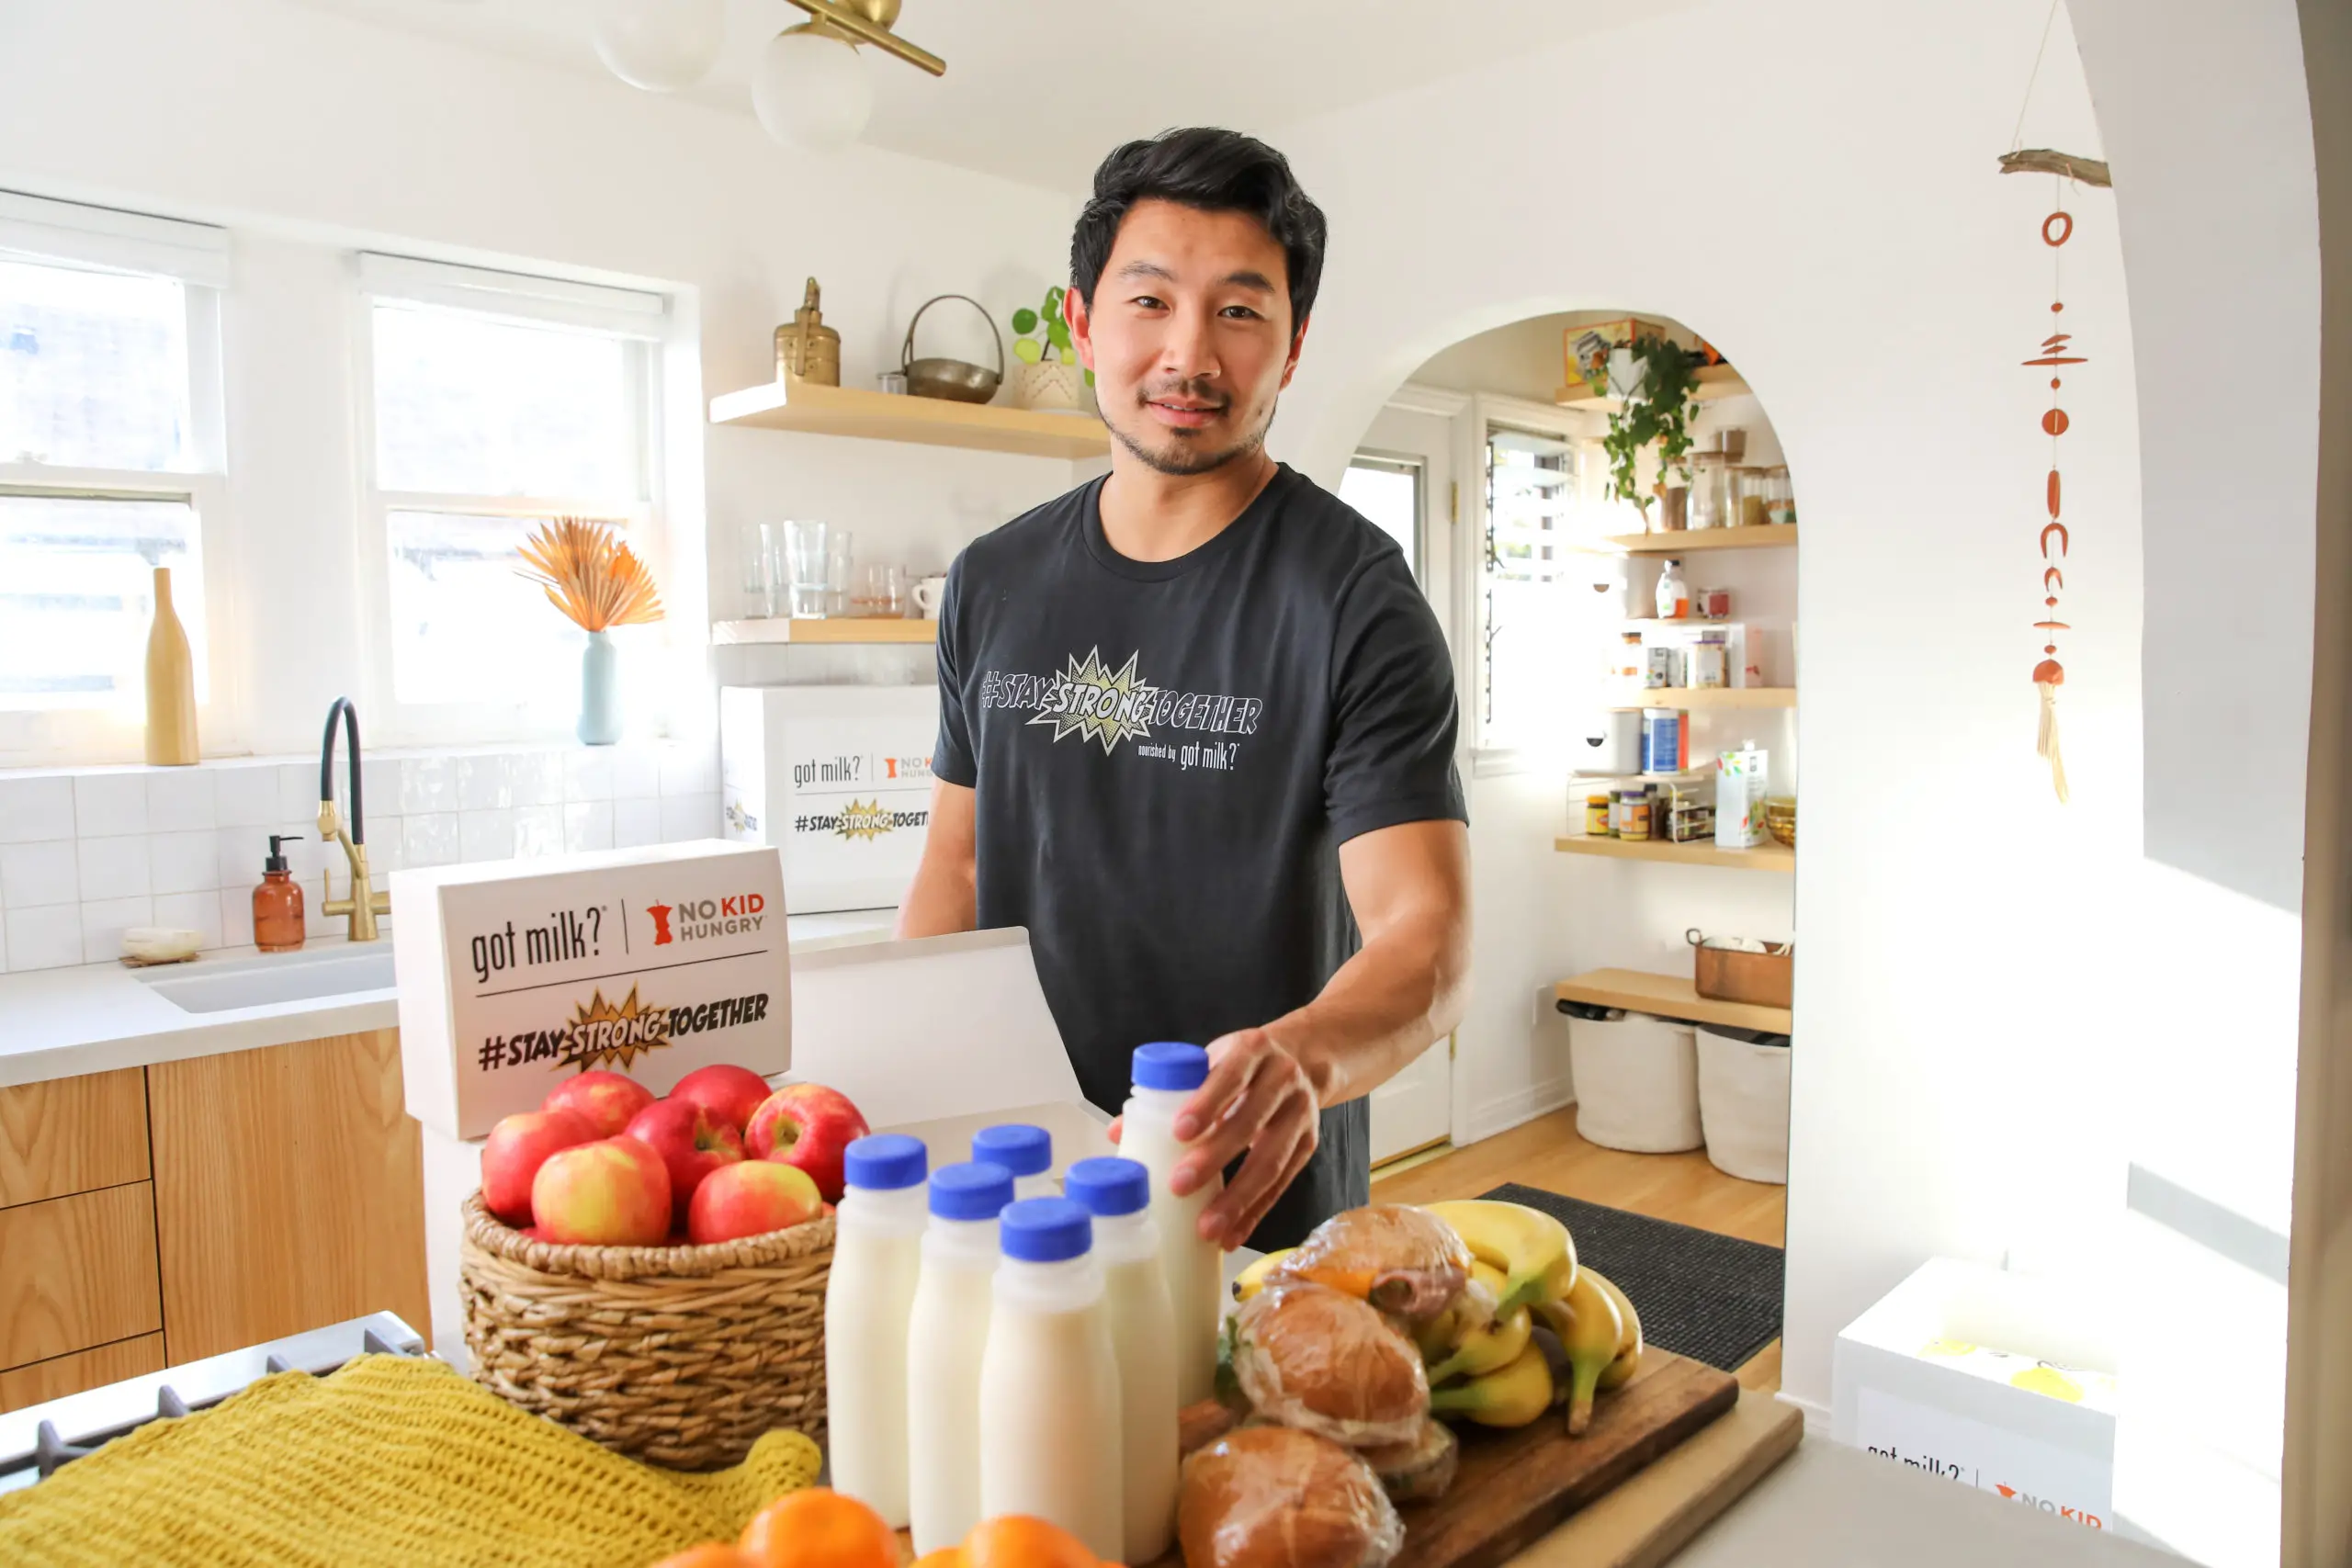 The Creators of 'got milk?' and Shang-Chi' Star Simu Liu Help Provide 1 Million Meals to California Kids Facing Hunger through #StayStrongTogether Initiative